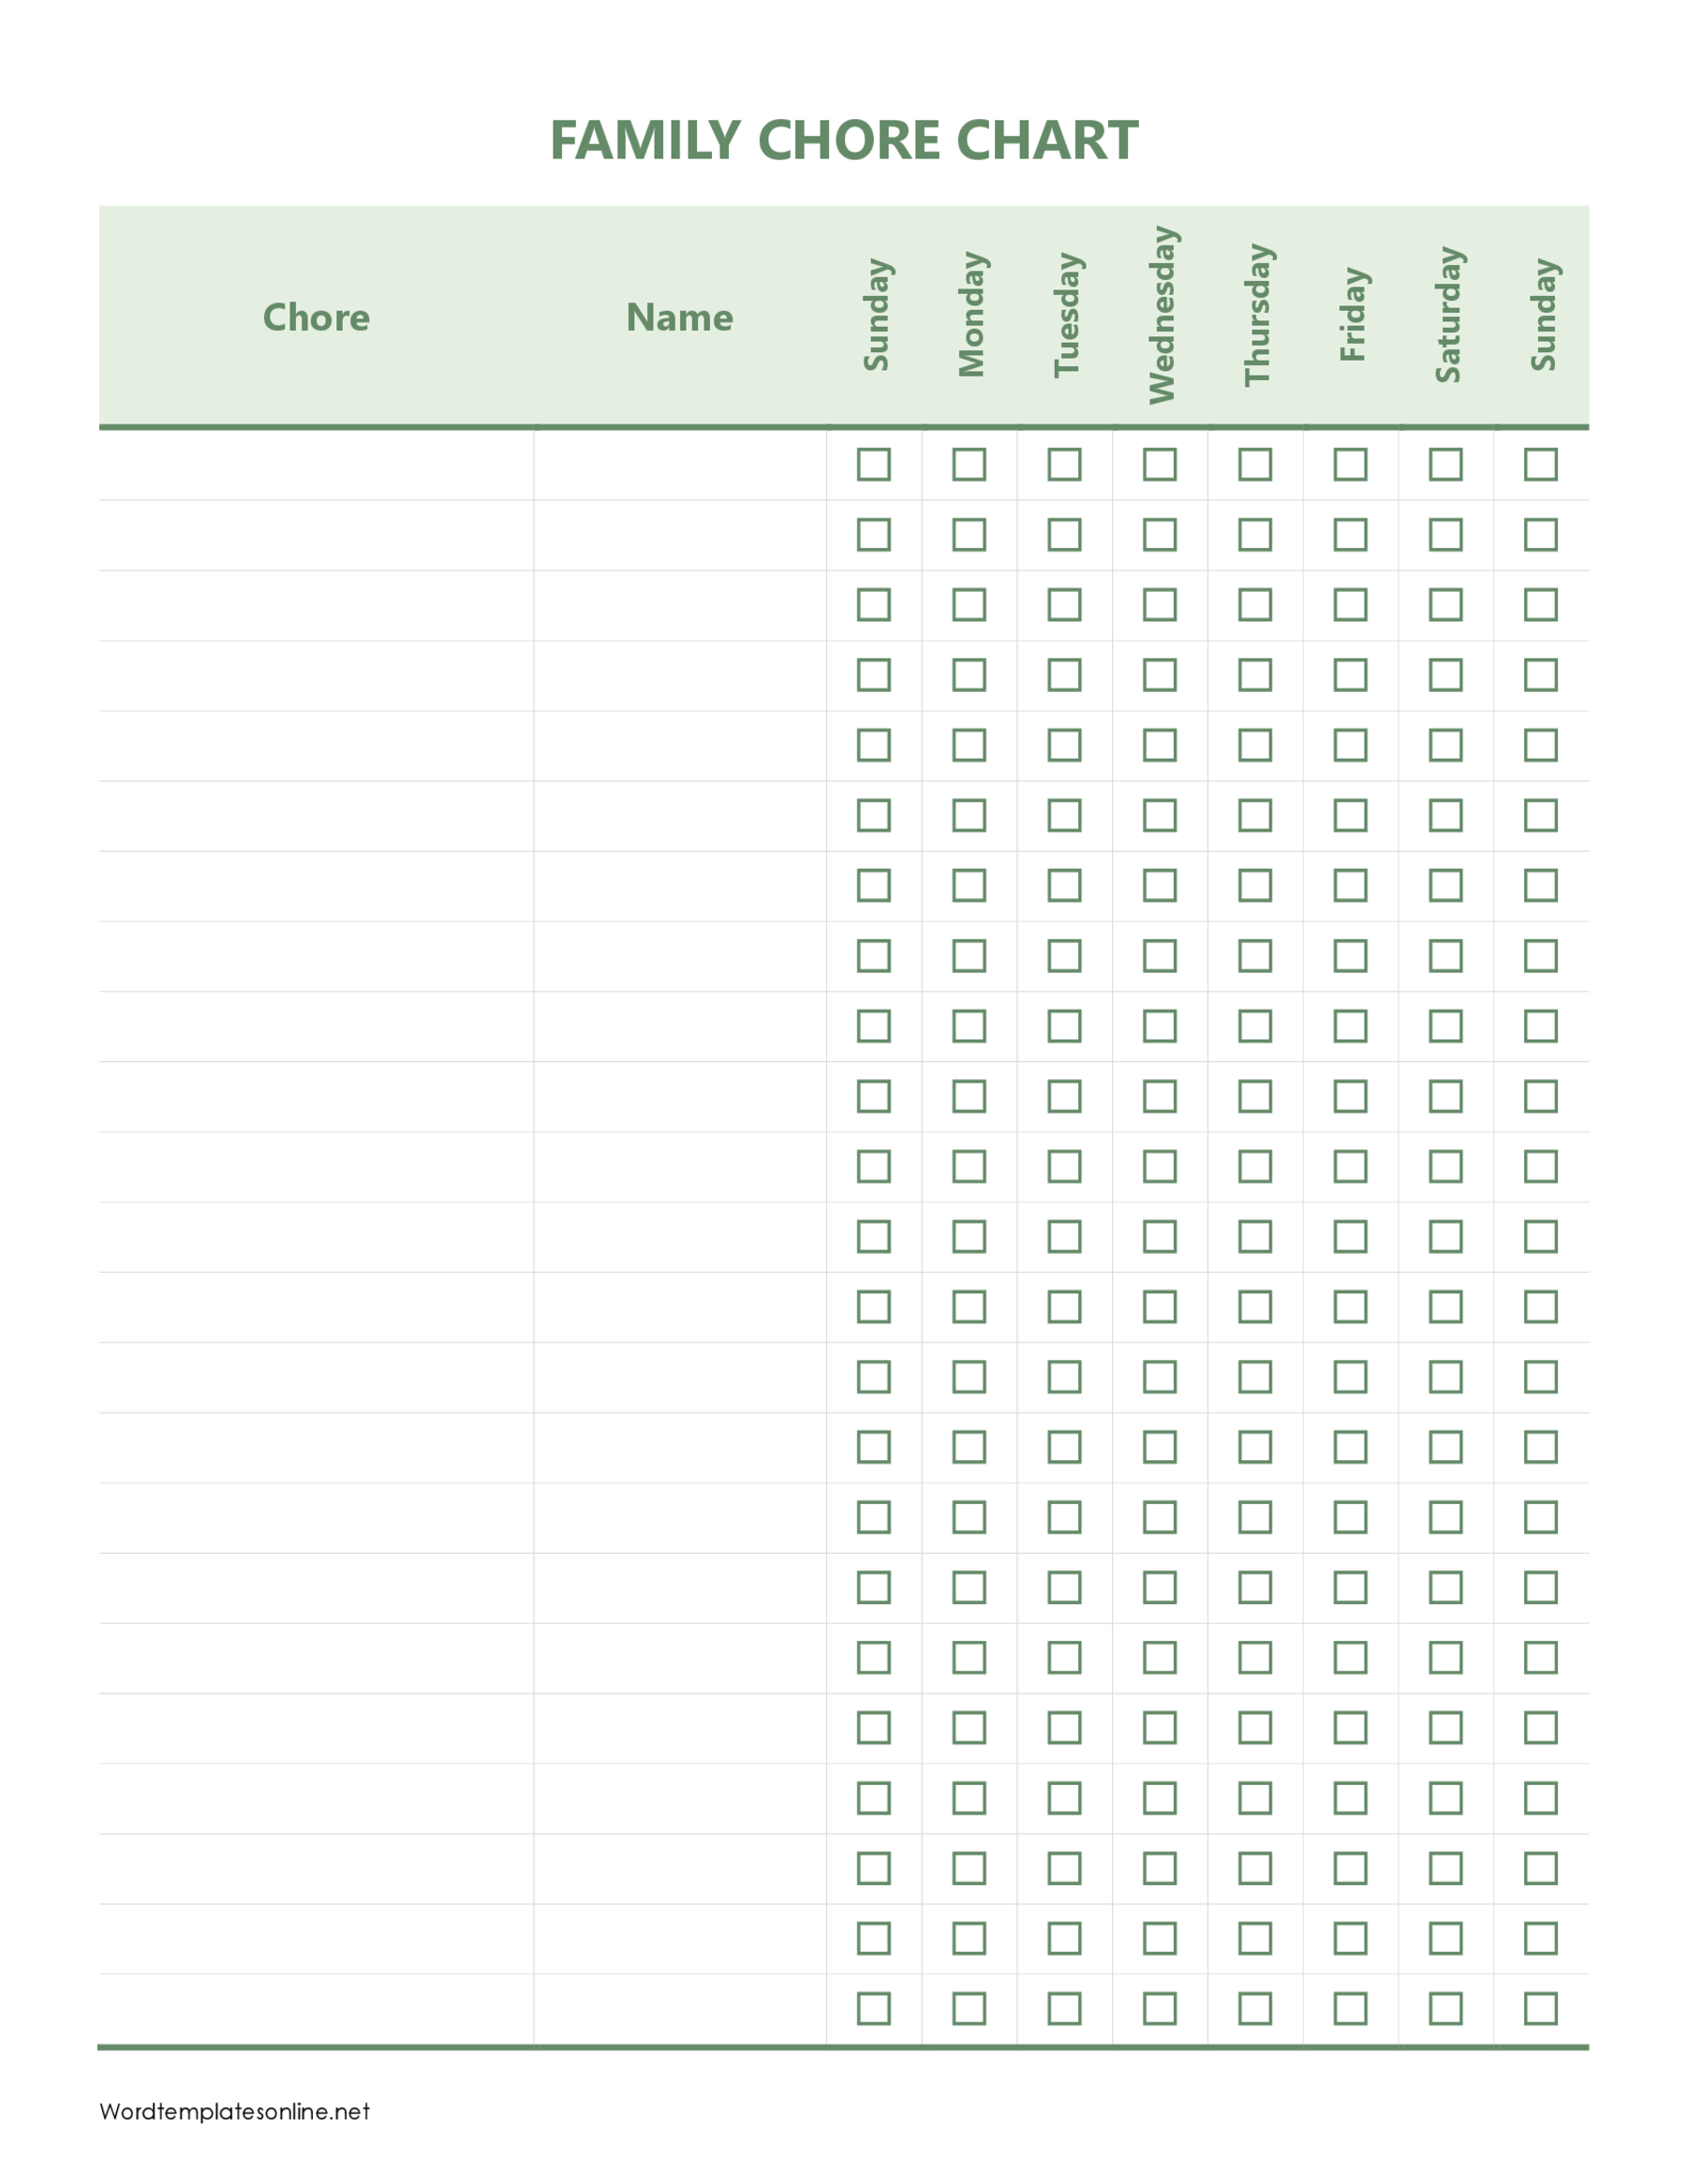 Free Family Chore Chart Template Example